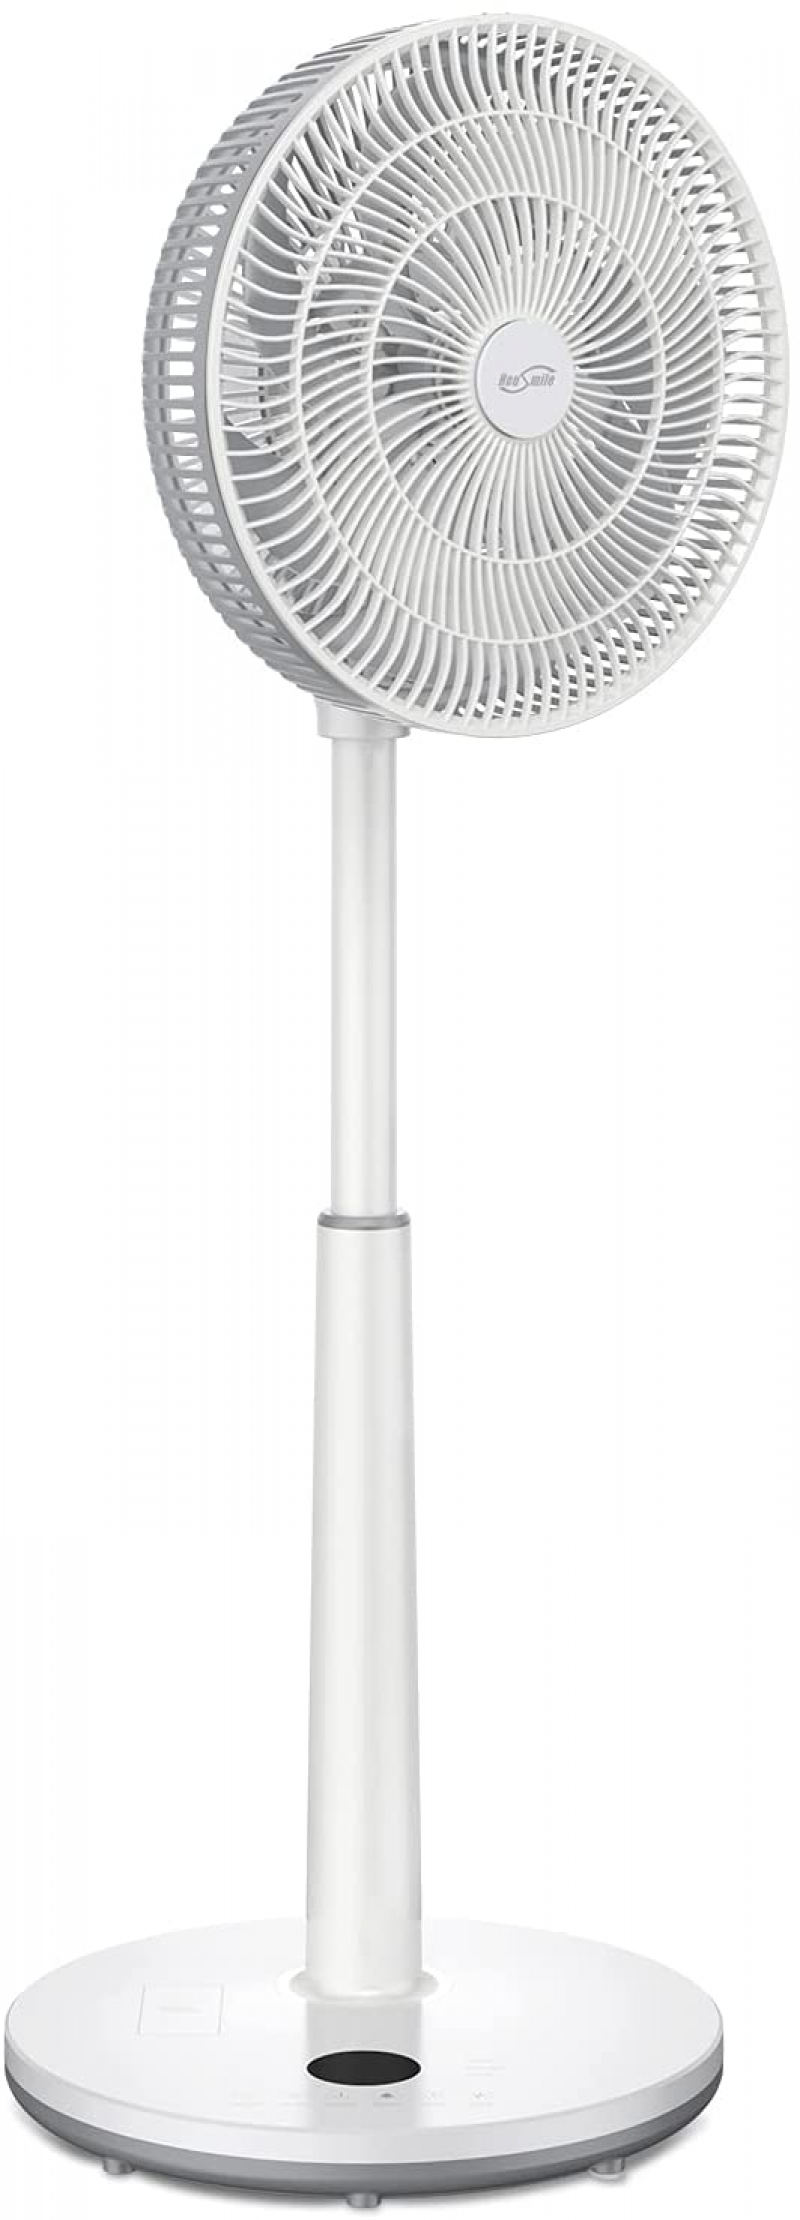 ihocon: Housmile Oscillating Standing Floor Fan, 12 inch Quiet Stand Up Fan with Remote 靜音立式風扇